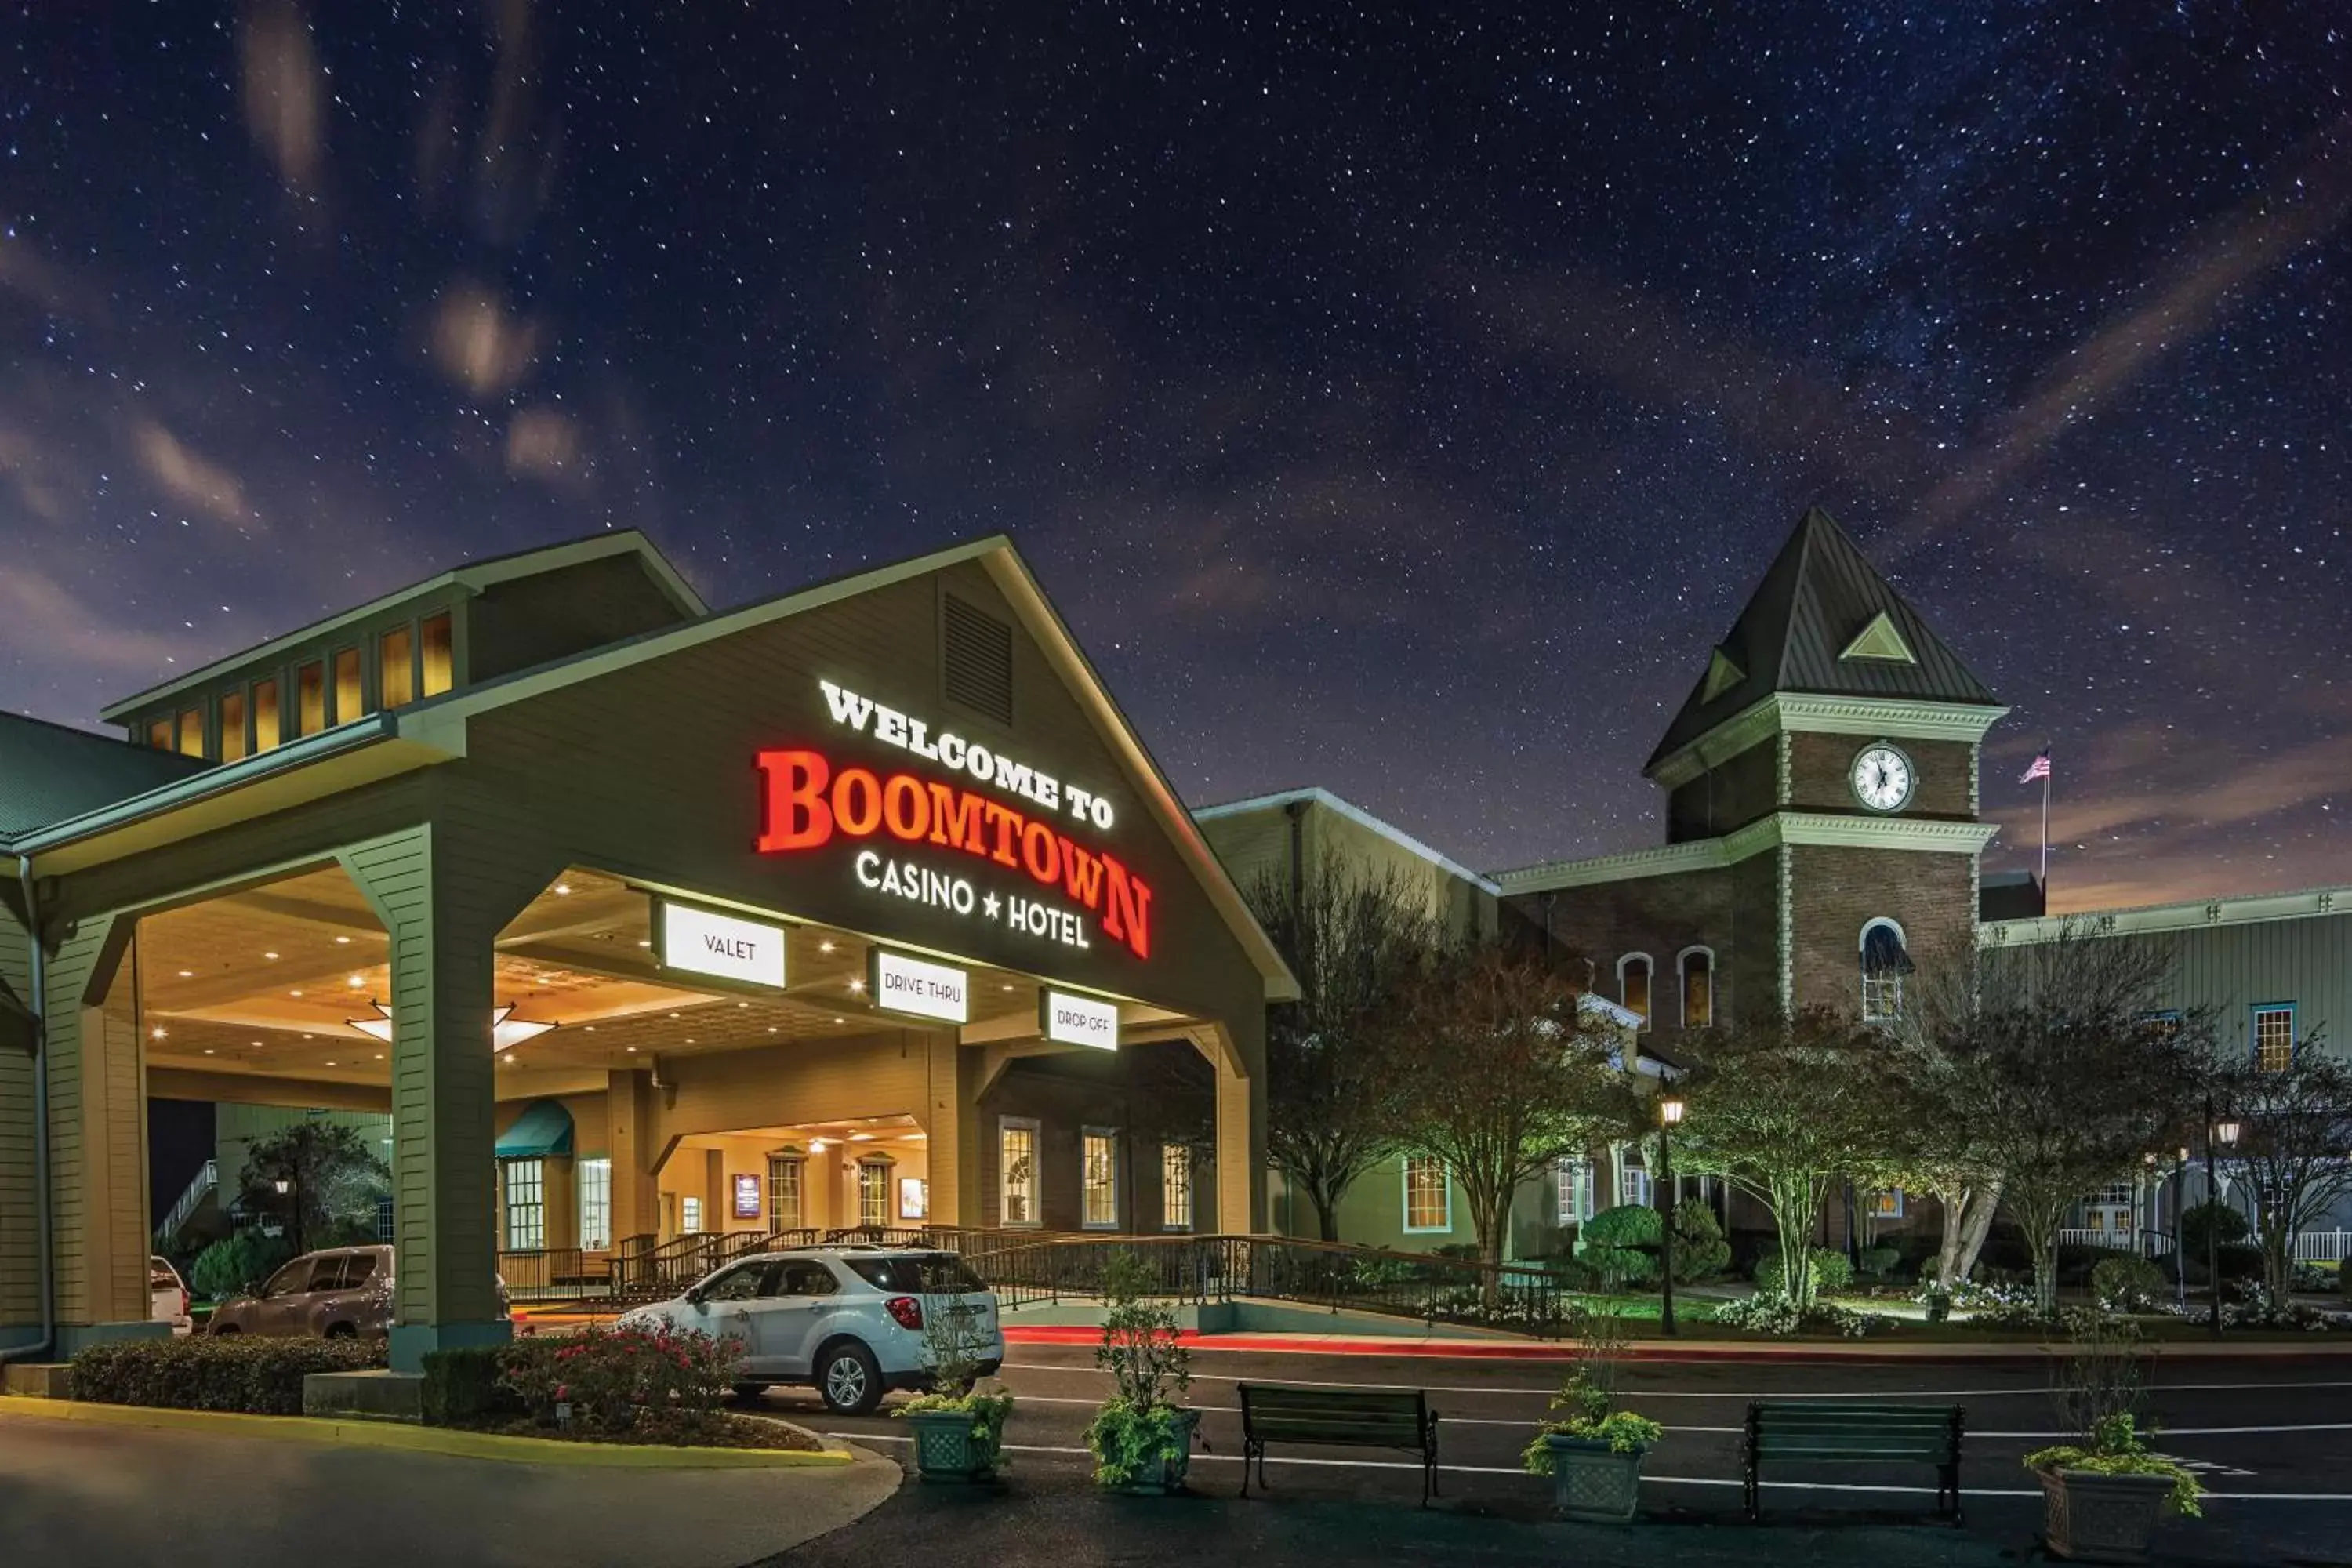 Property Building in Boomtown Casino and Hotel New Orleans